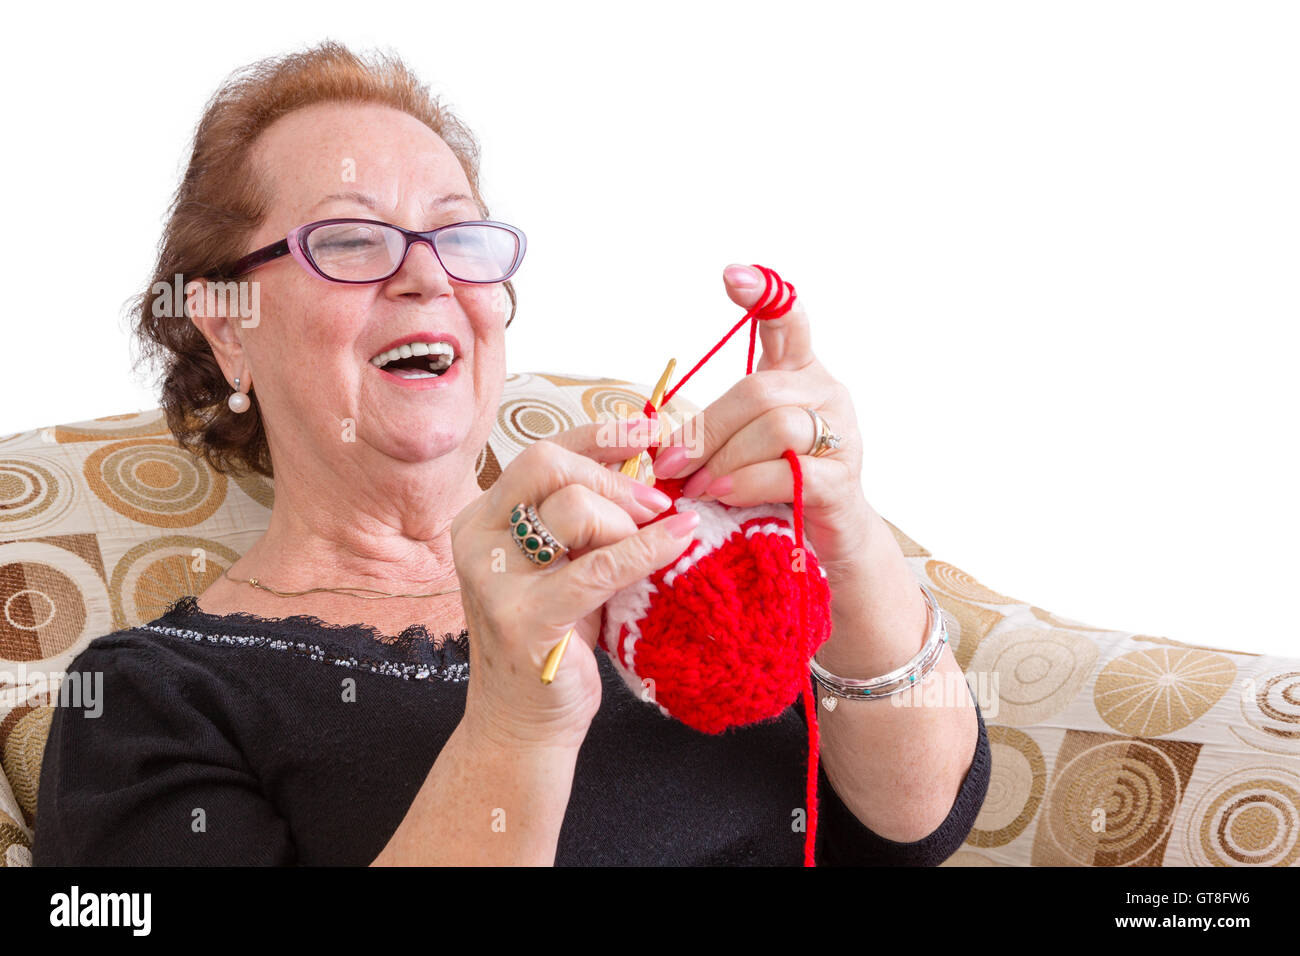 Happy elderly lady enjoying a joke laughing as she concentrates on her colorful festive red knitting while relaxing in a comfort Stock Photo